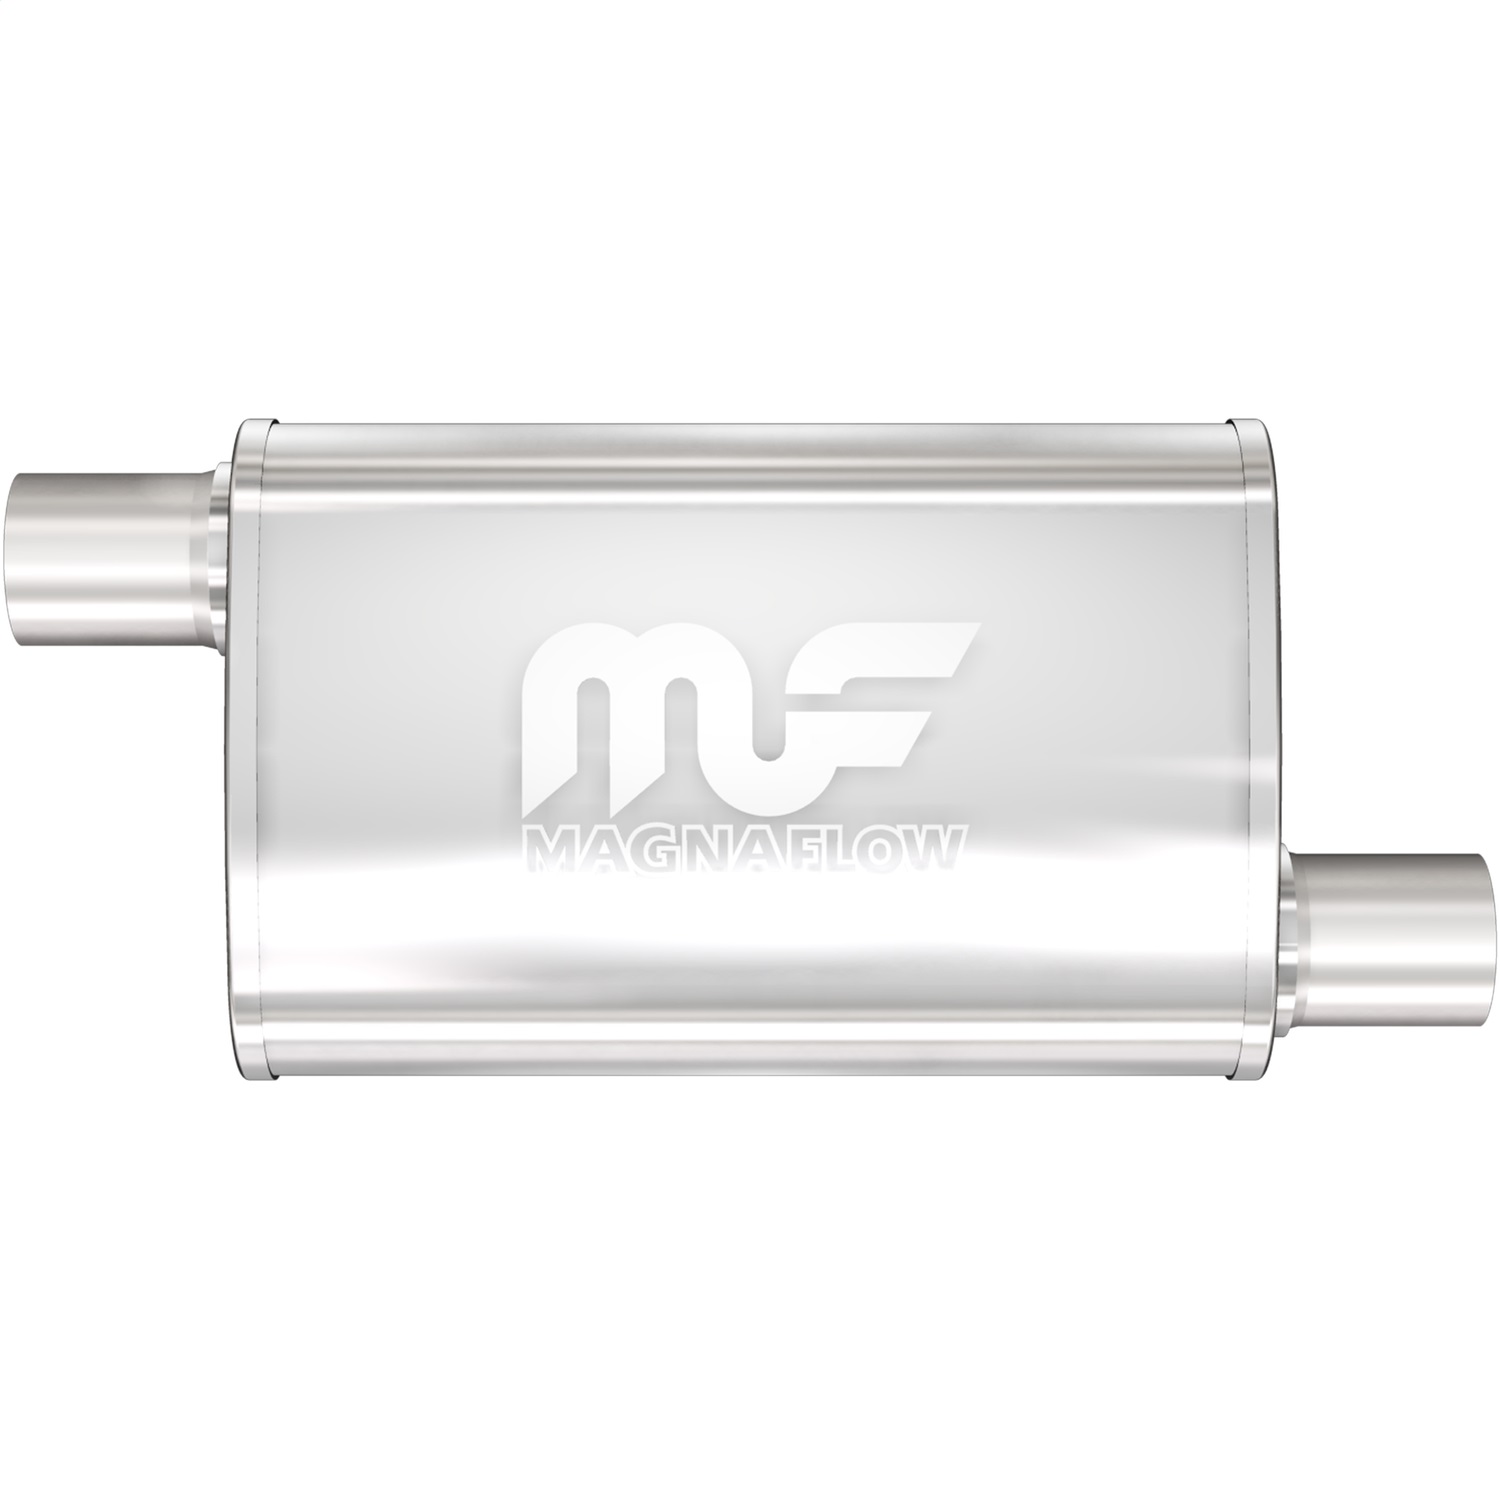 MagnaFlow Exhaust Products Magnaflow Performance Exhaust 11236 Stainless Steel Muffler